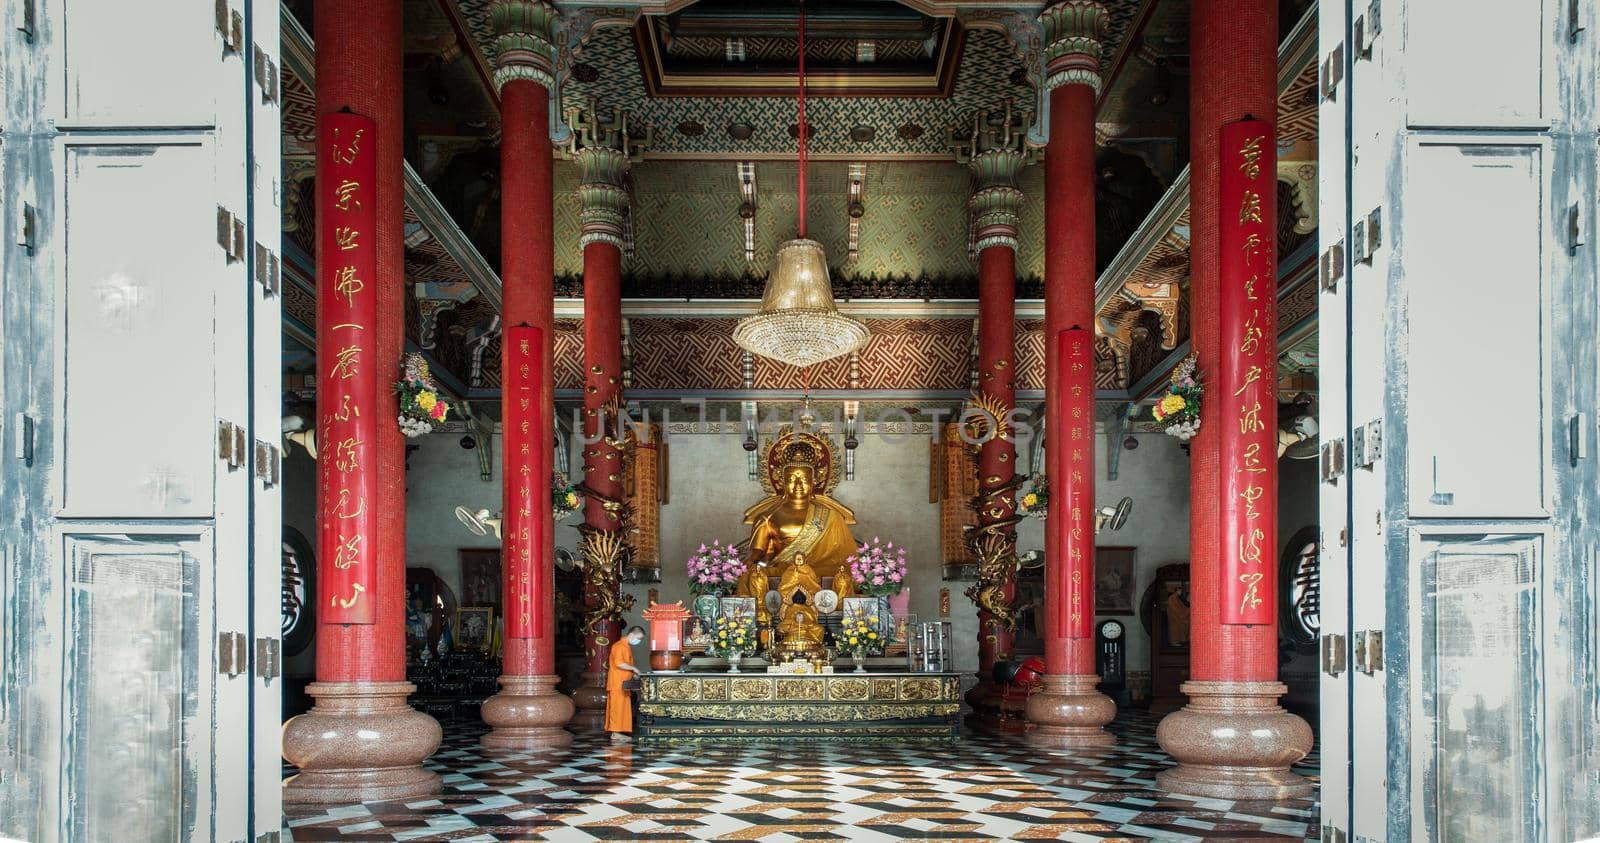 Architecture of chinese-style temple with the Golden buddha statue inside the Wat Bhoman Khunaram. by tosirikul